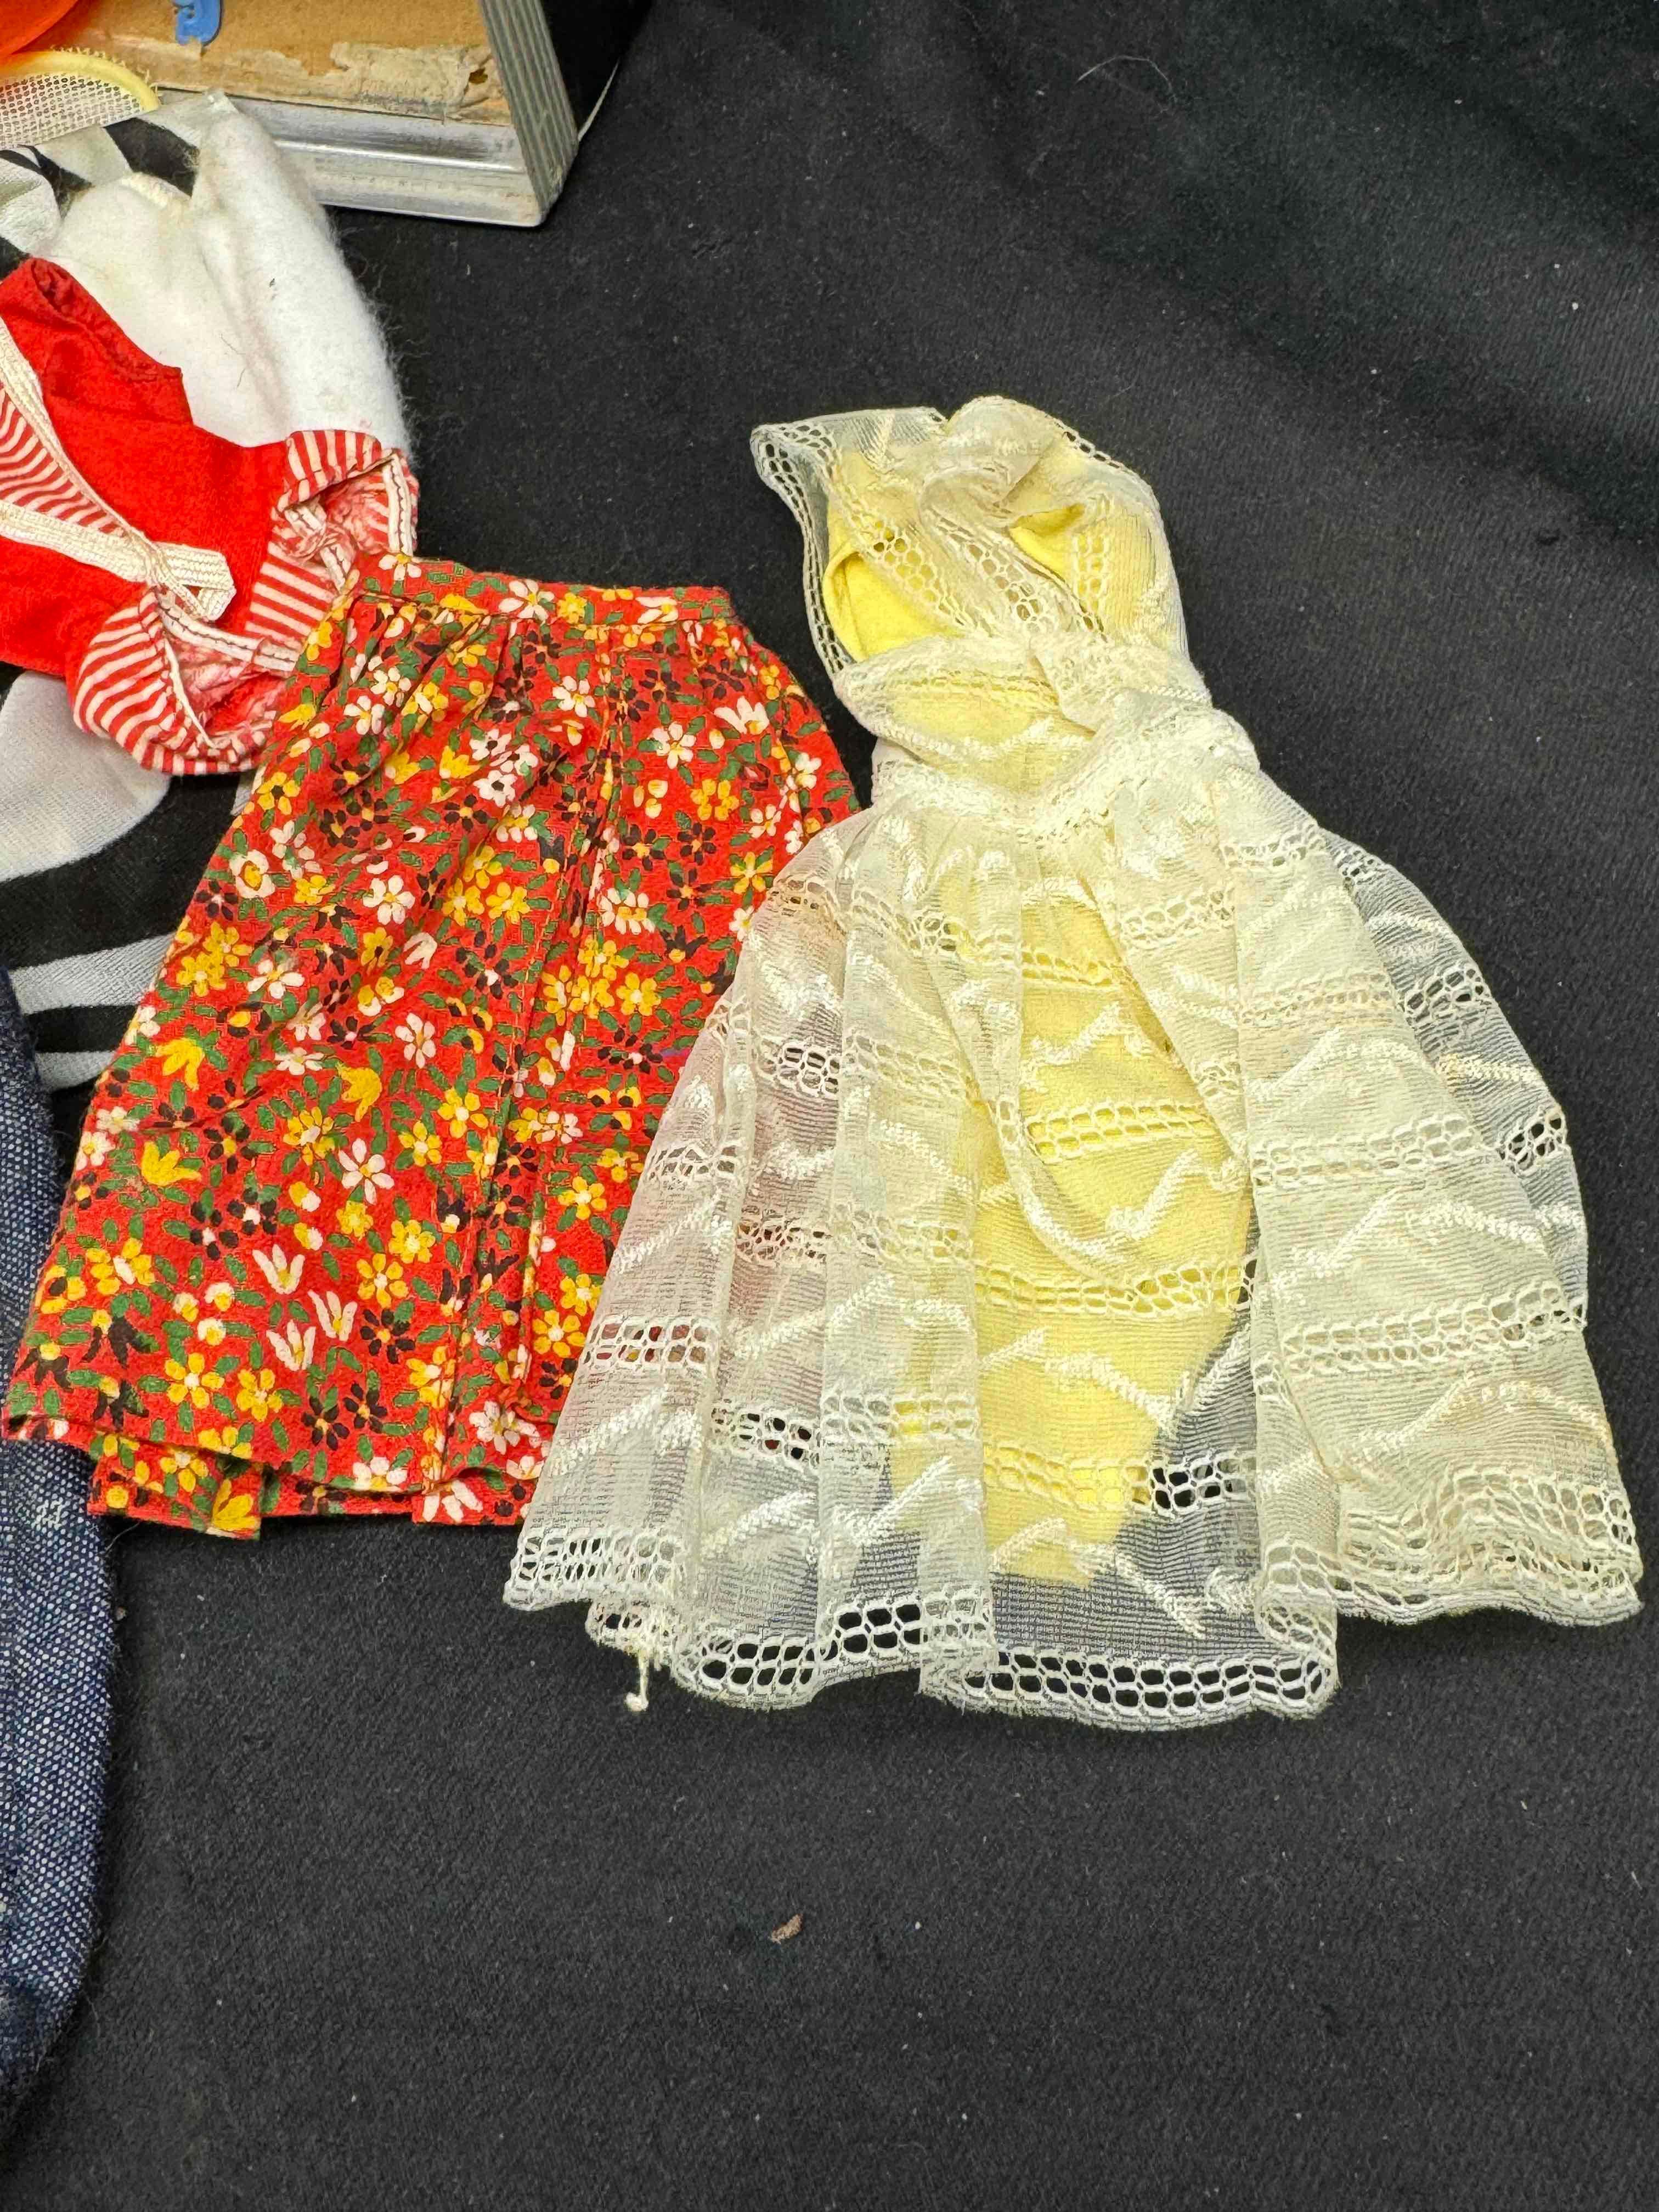 4 Vintage Barbie Dolls Skipper, Clothing Accessories 1950s-1960s with Case